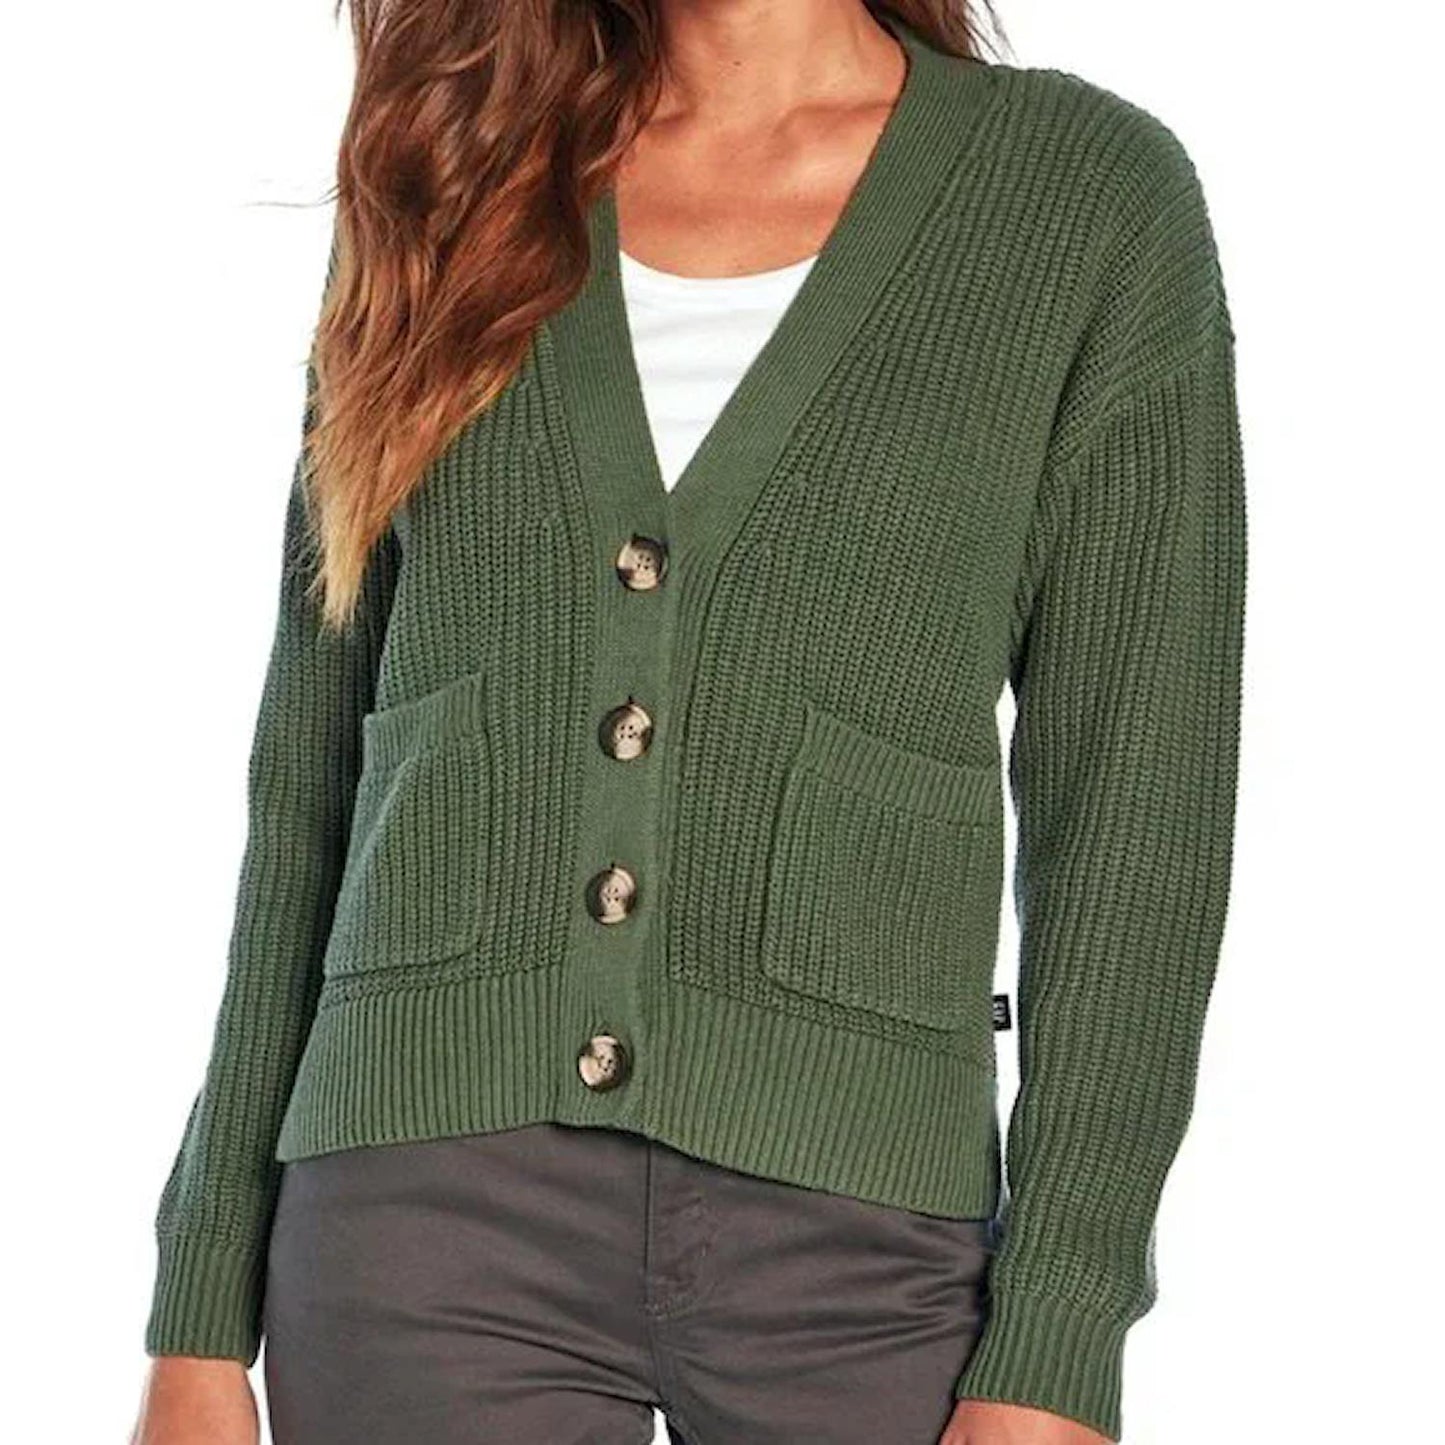 GAP Women's Soft Knit Cotton Pocketed Button Front Cardigan